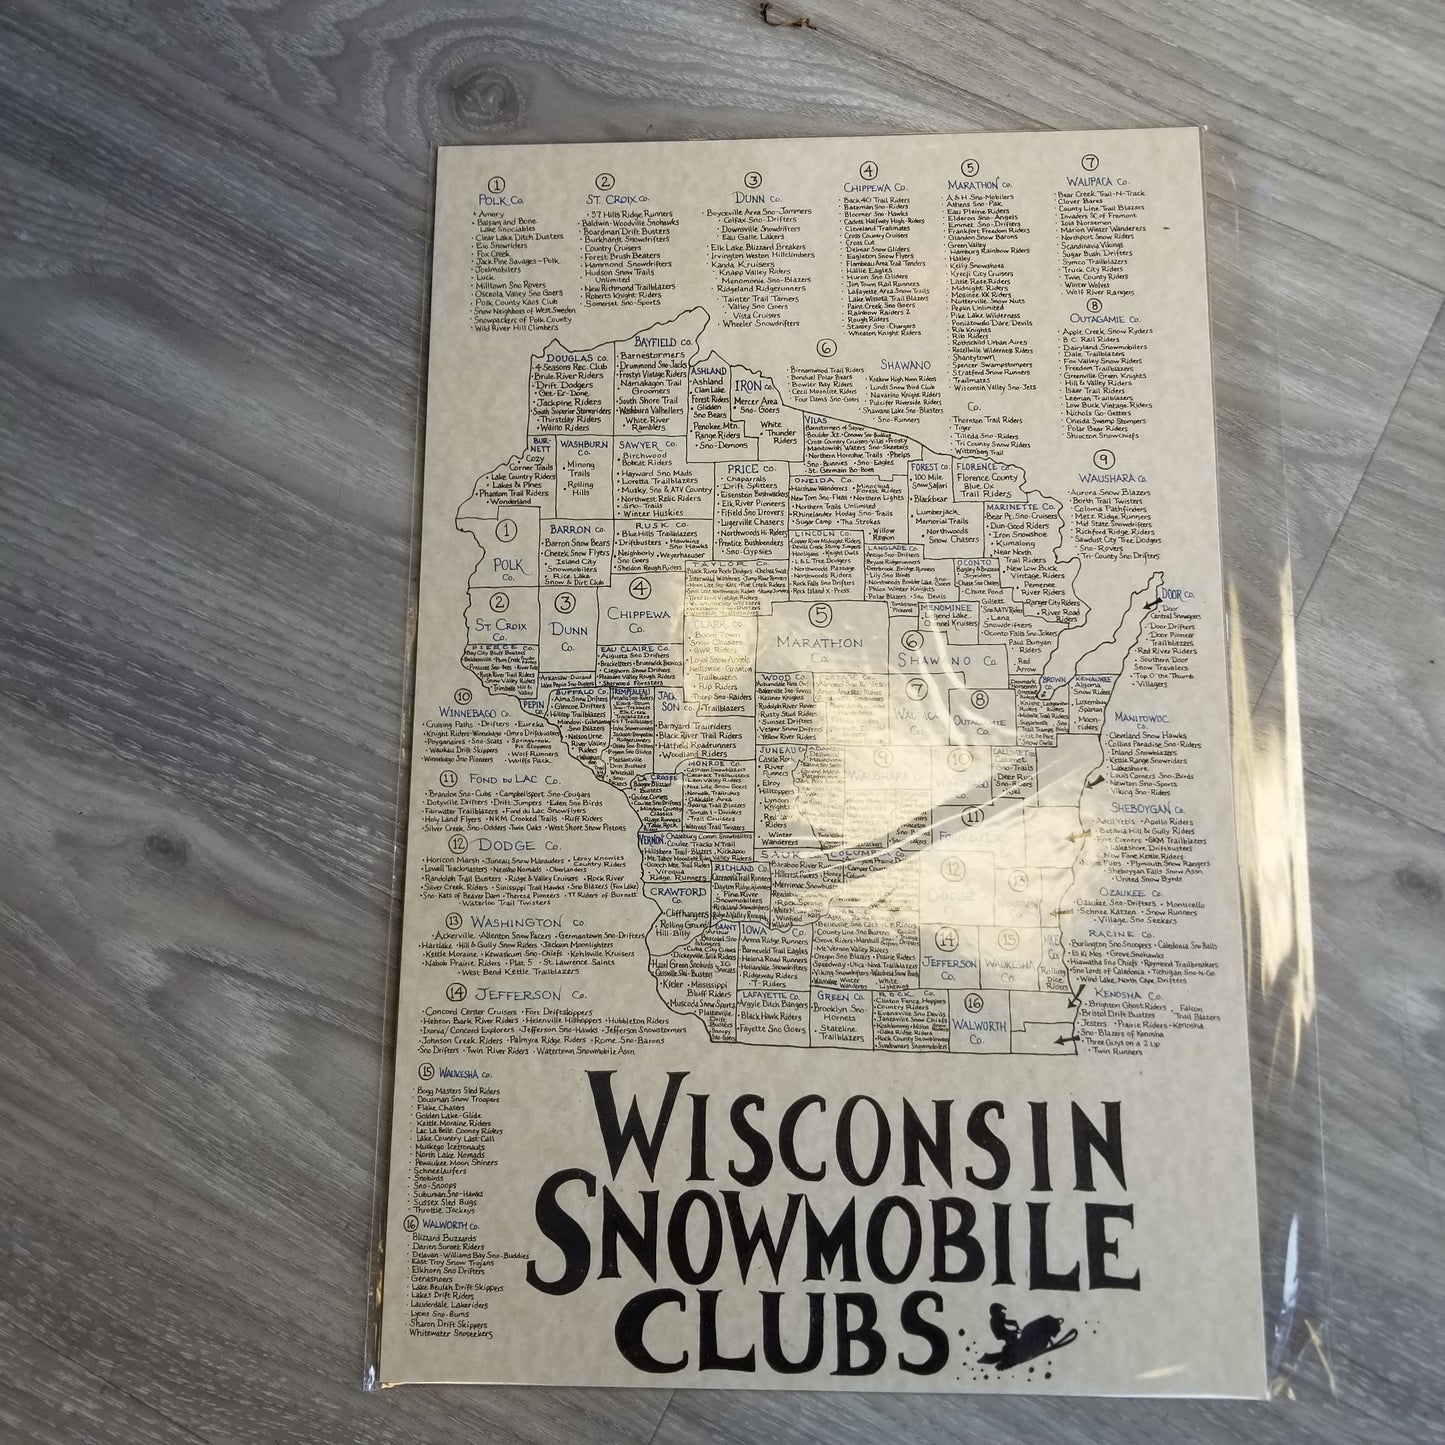 Wisconsin snowmobile clubs map